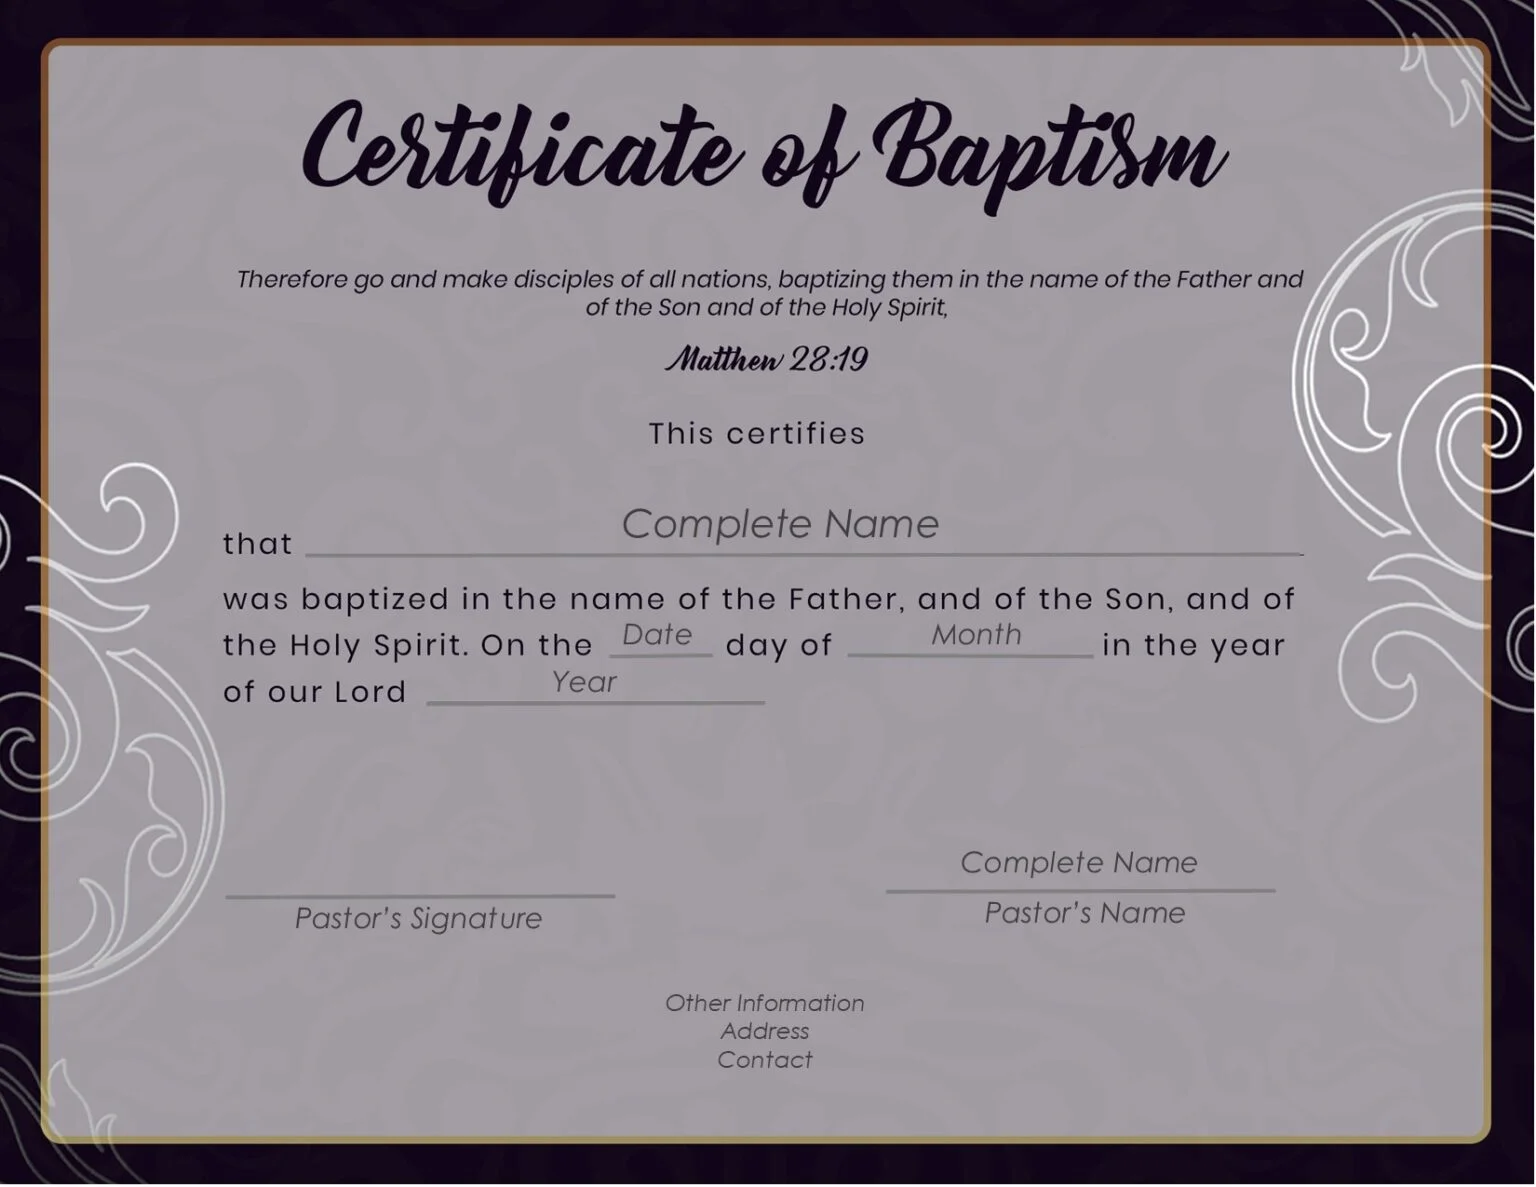 Baptismal Certificate - Free Baptism Certificate Template 5 by Ministry Voice